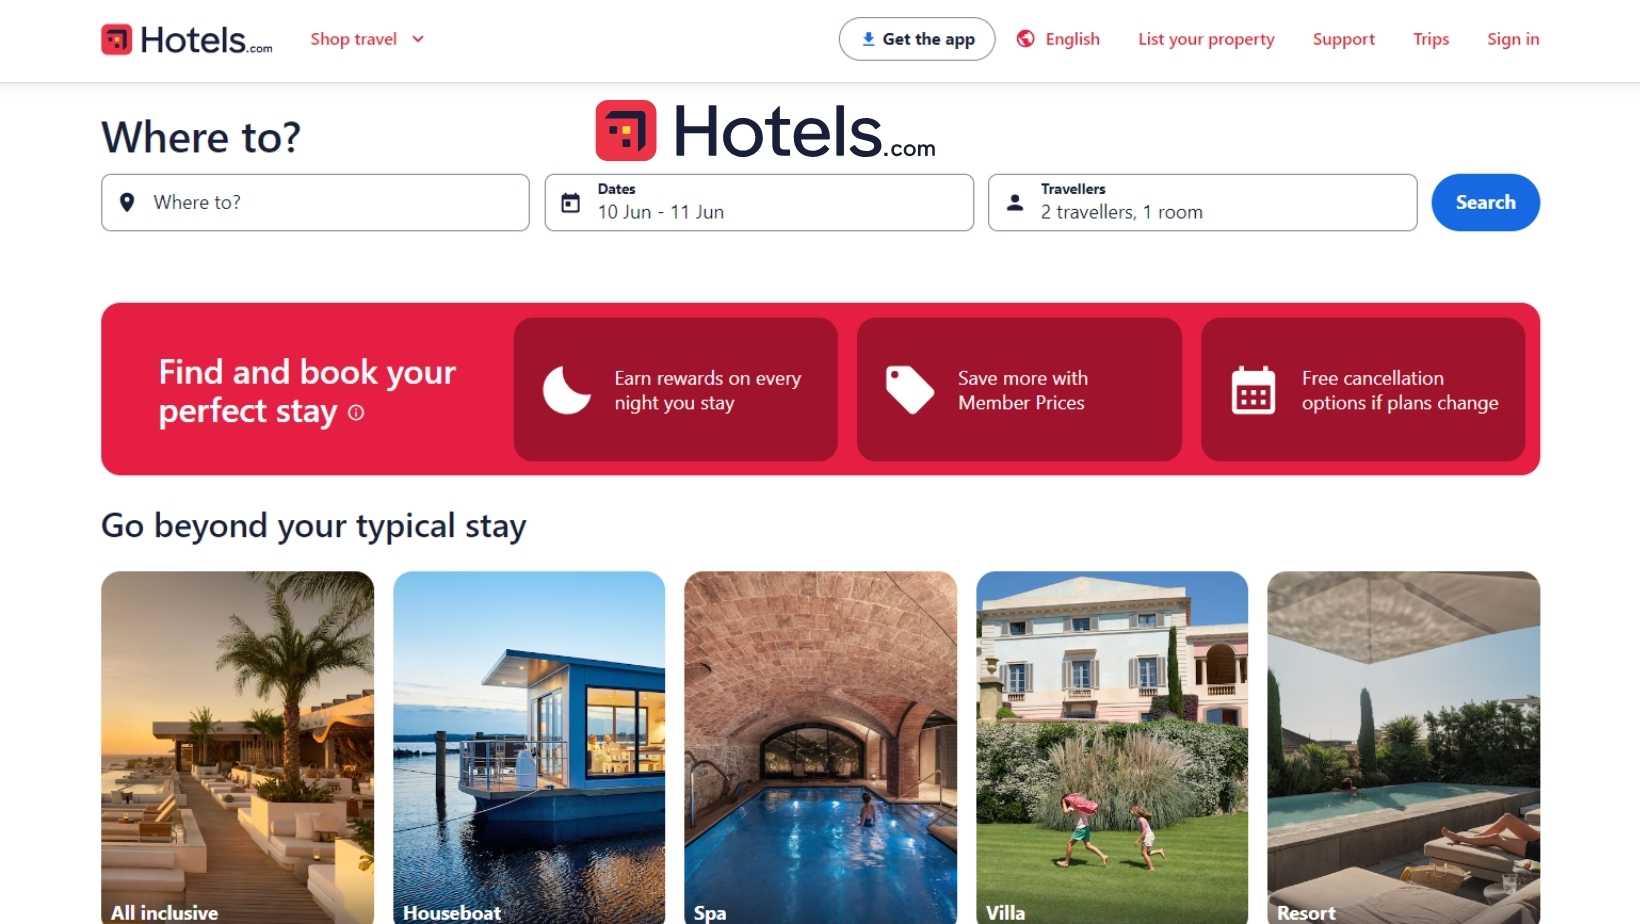 Discovering-Hotels.com